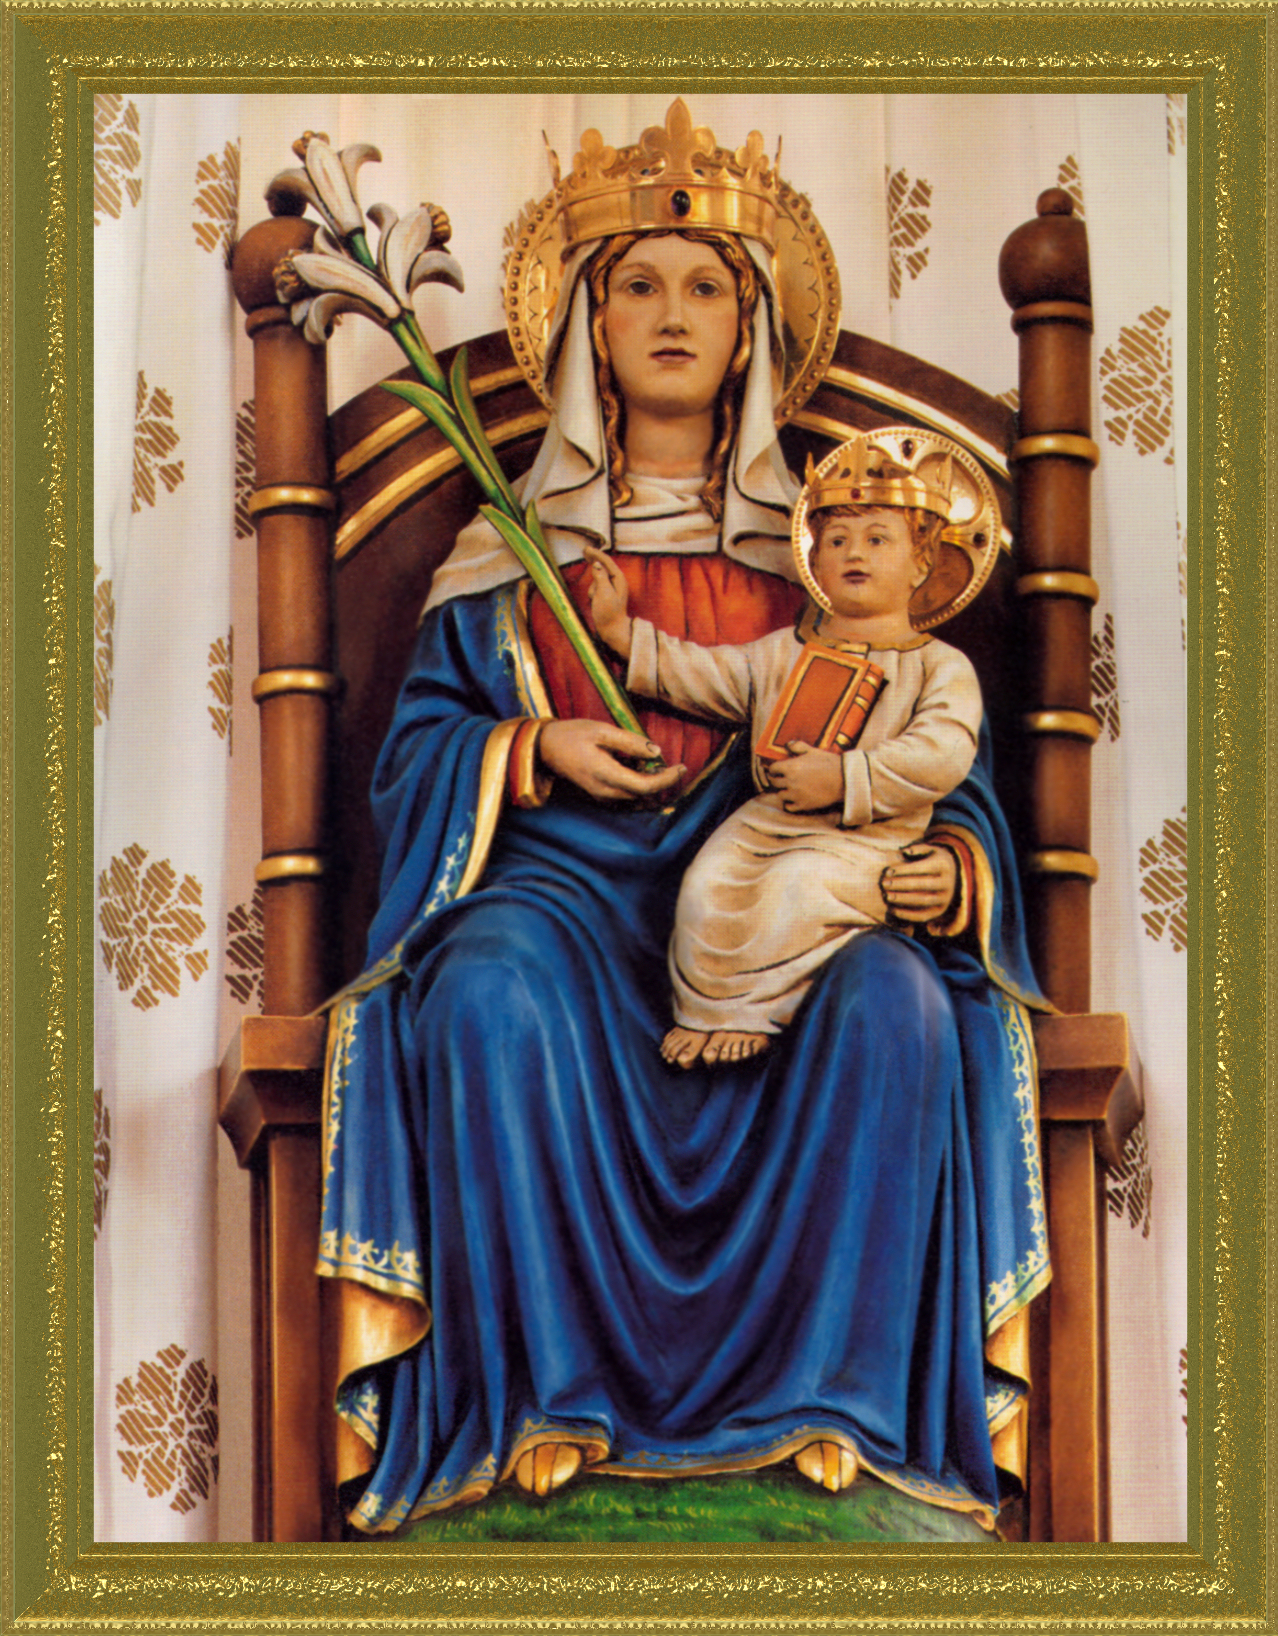 OUR LADY OF WALSINGHAM